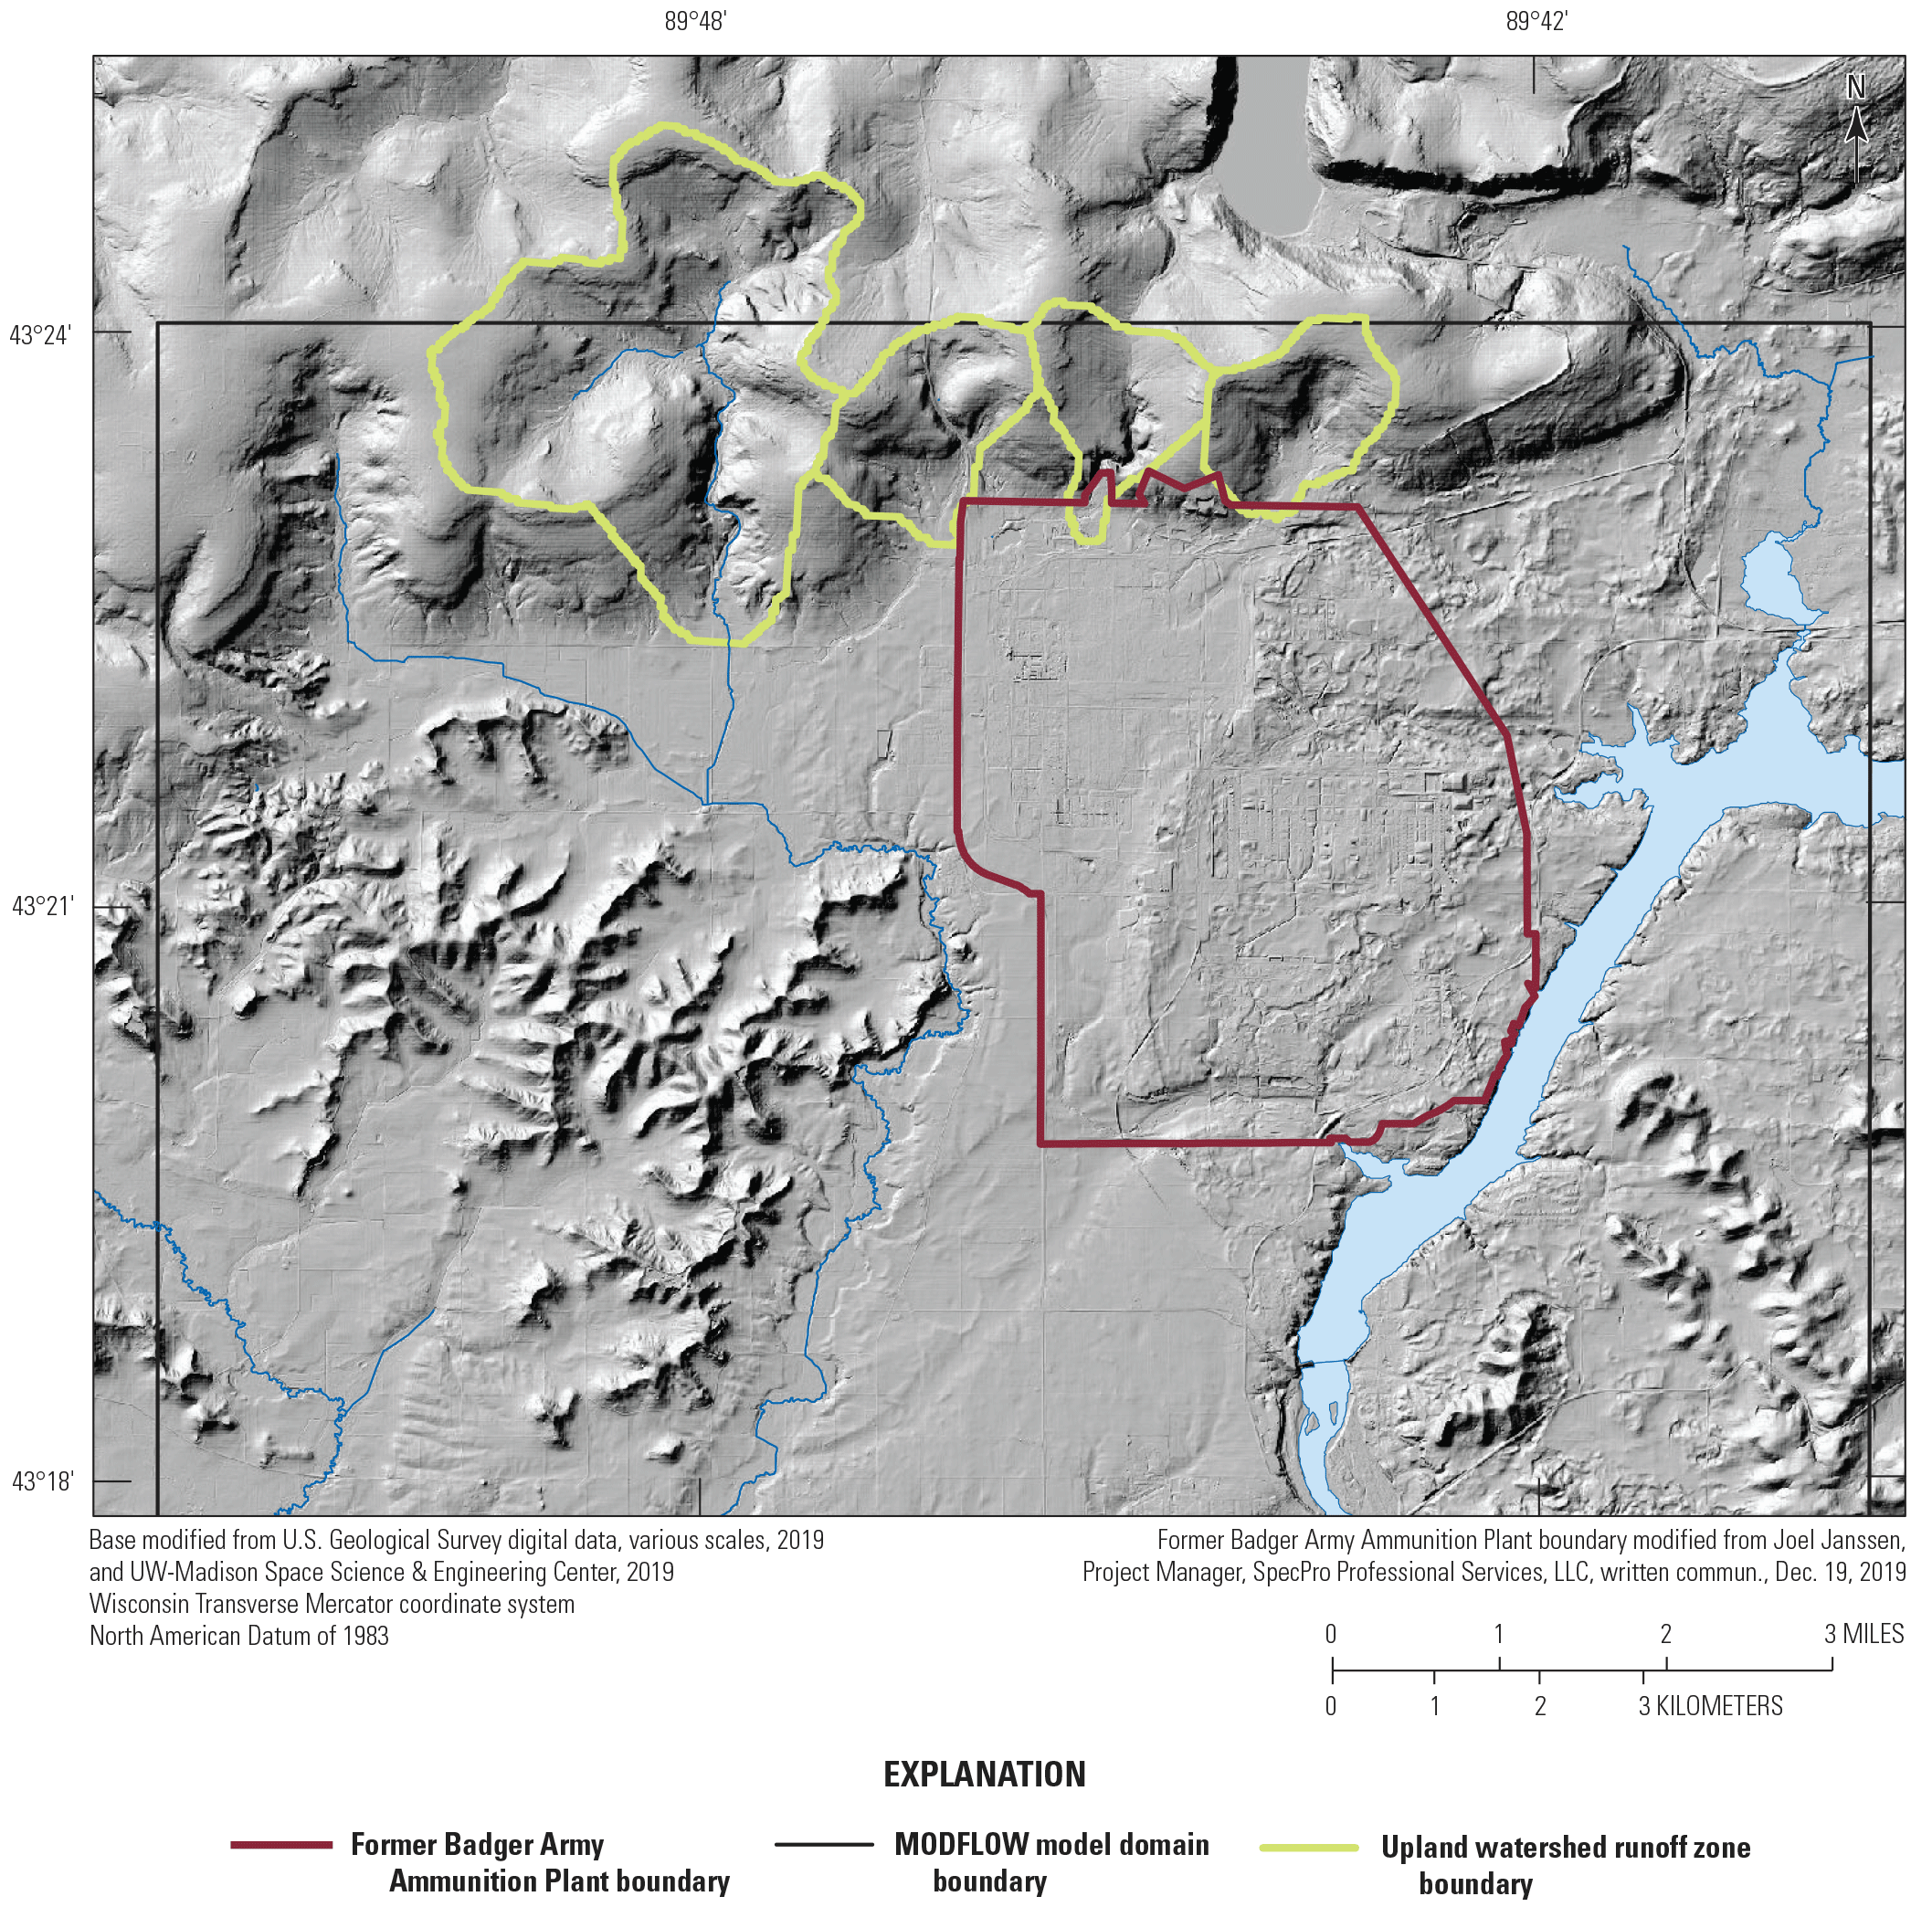 Four upland watershed zones are along the northern edge of the MODFLOW model boundary.